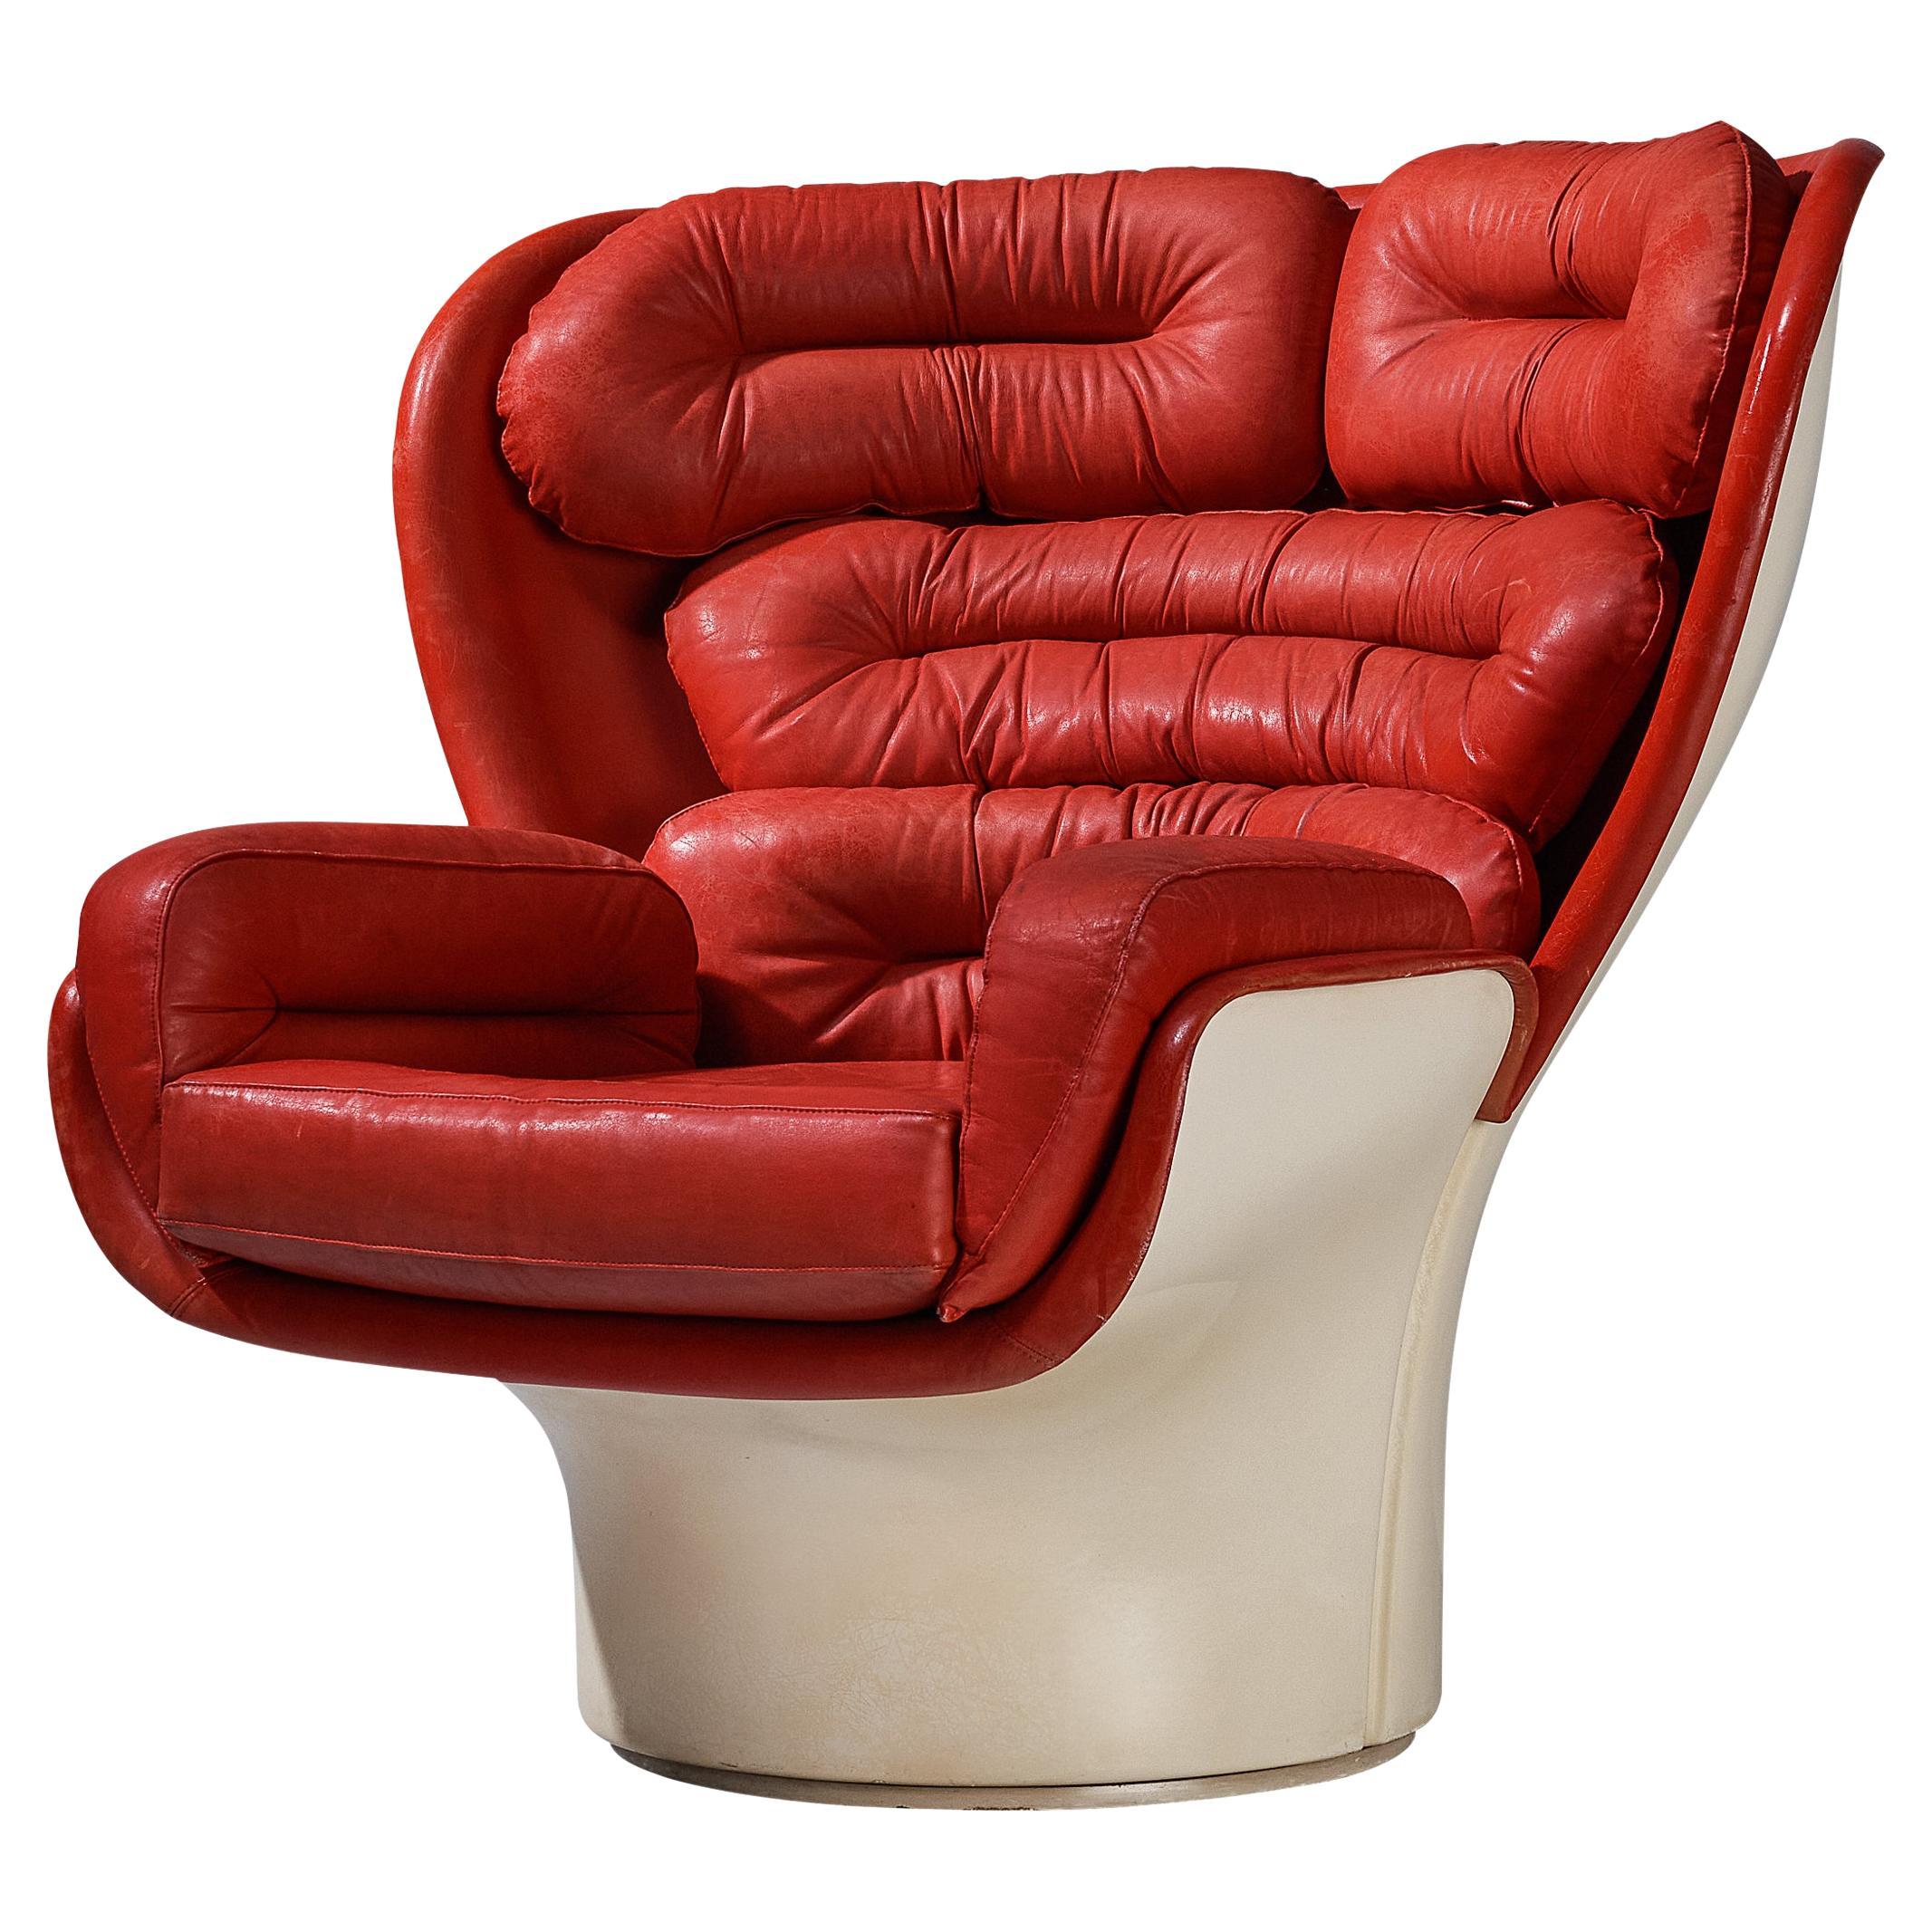 Joe Colombo for Comfort Lounge Chair 'Elda' in Red Leather 